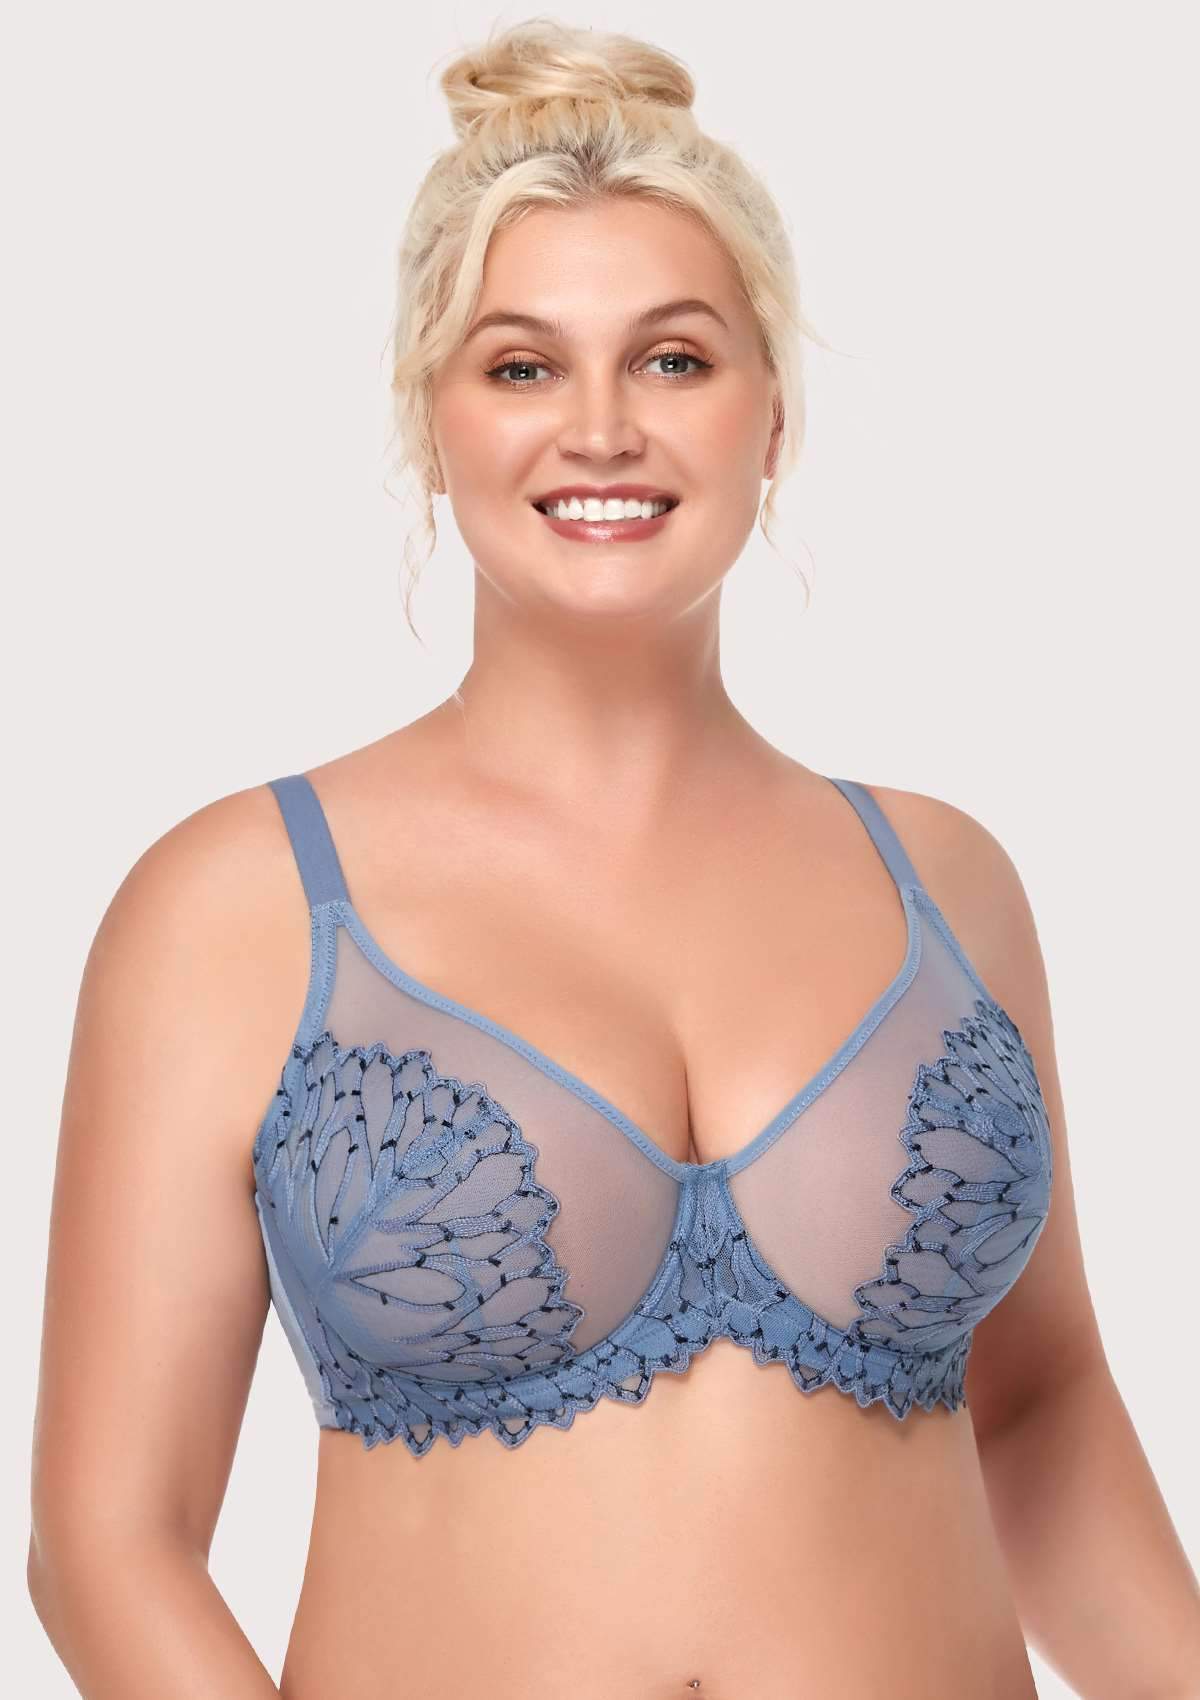 HSIA Chrysanthemum Plus Size Lace Bra: Back Support Bra For Posture - Light Pink / 34 / C